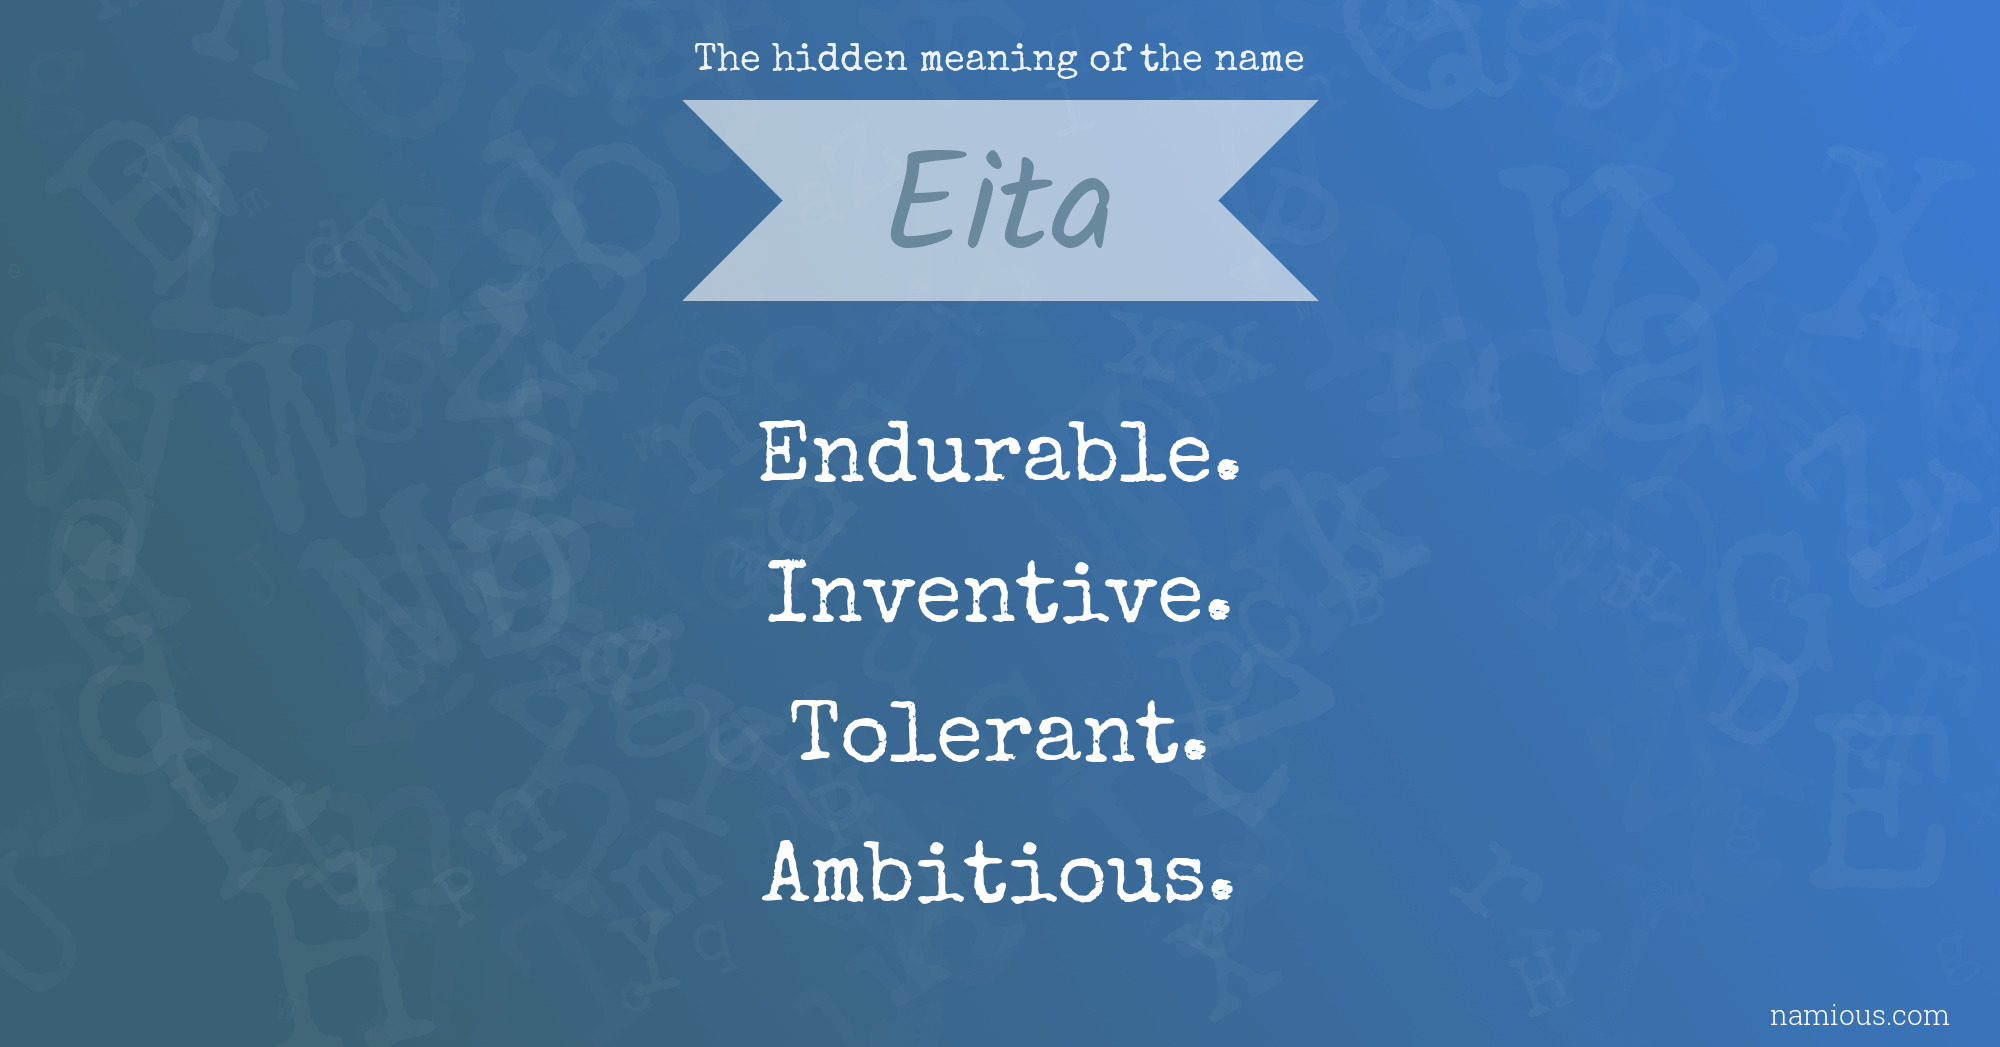 The hidden meaning of the name Eita